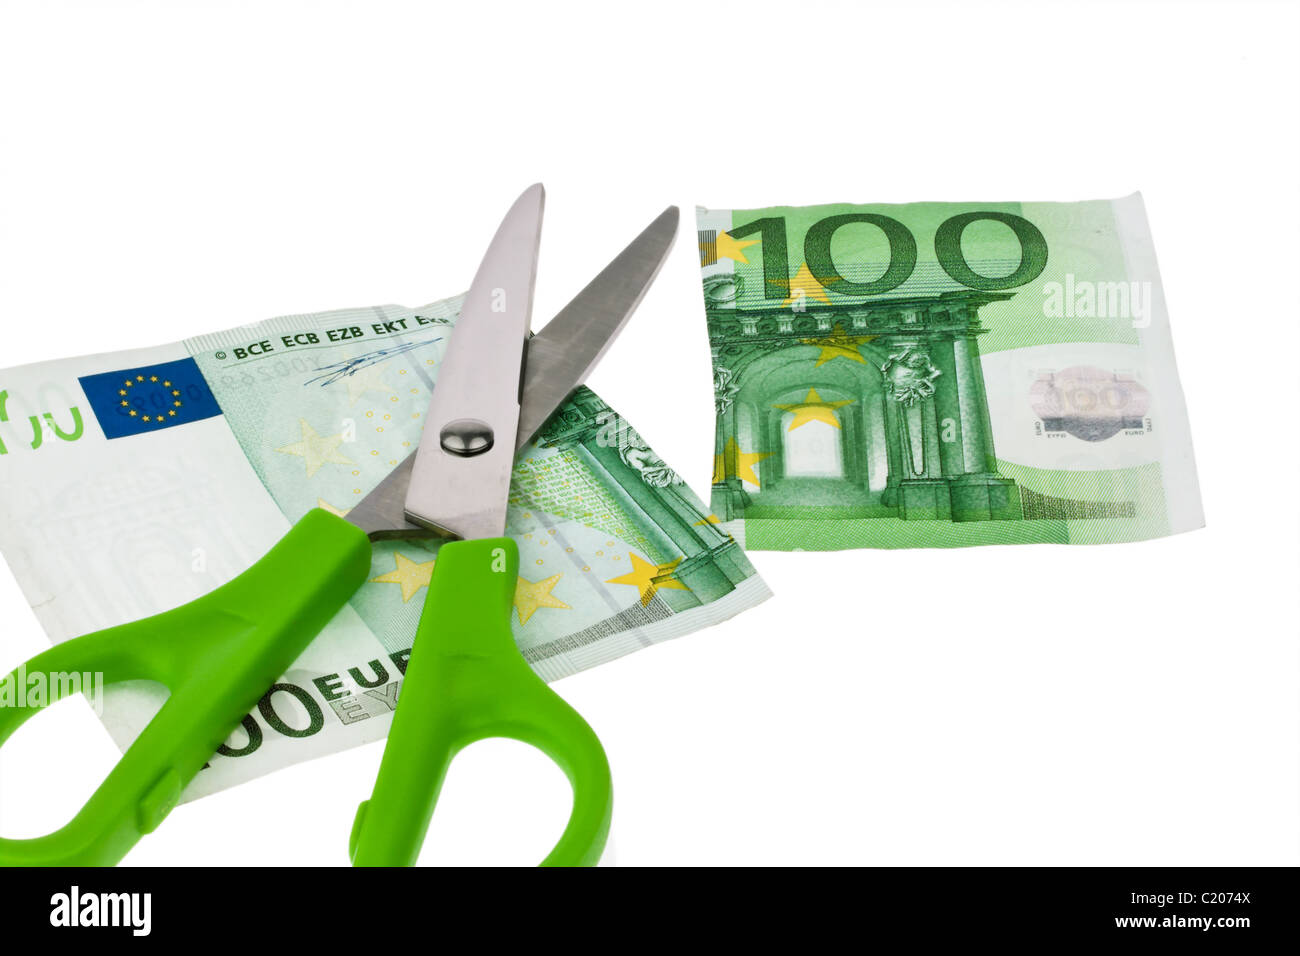 Euro banknotes and scissors Stock Photo